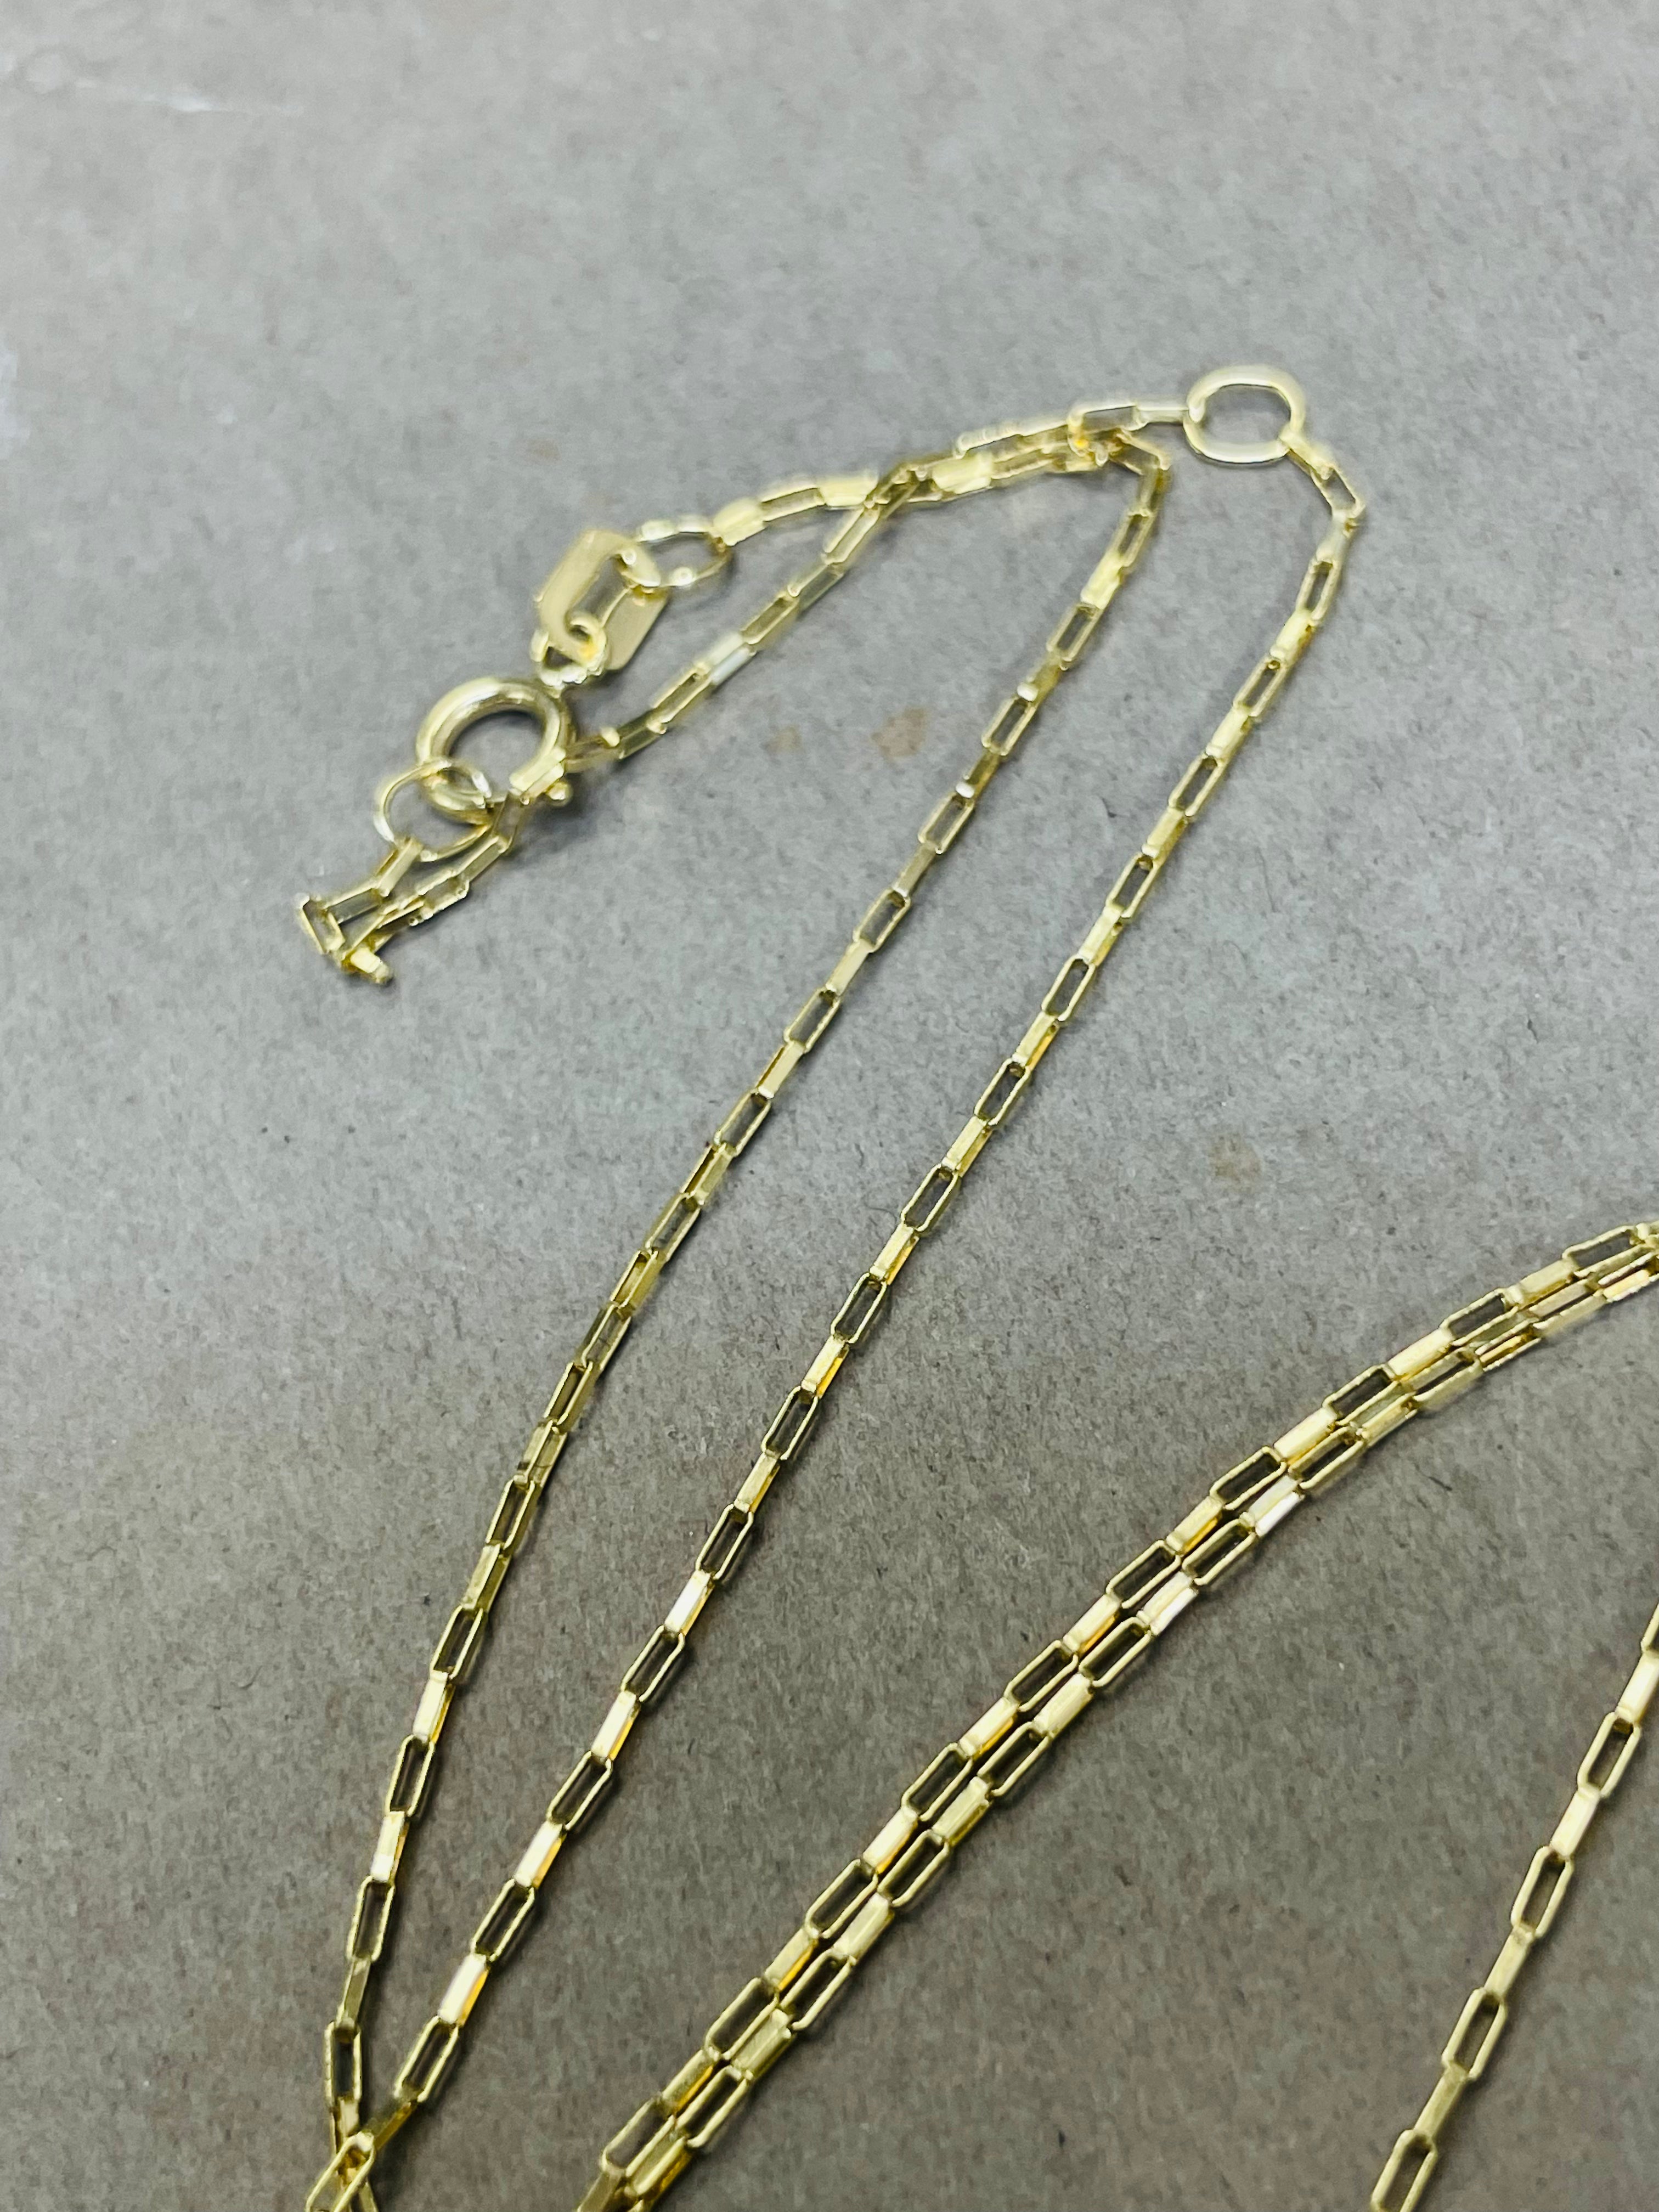 16-18" 1mm 14K Yellow Gold Paperclip Link Chain